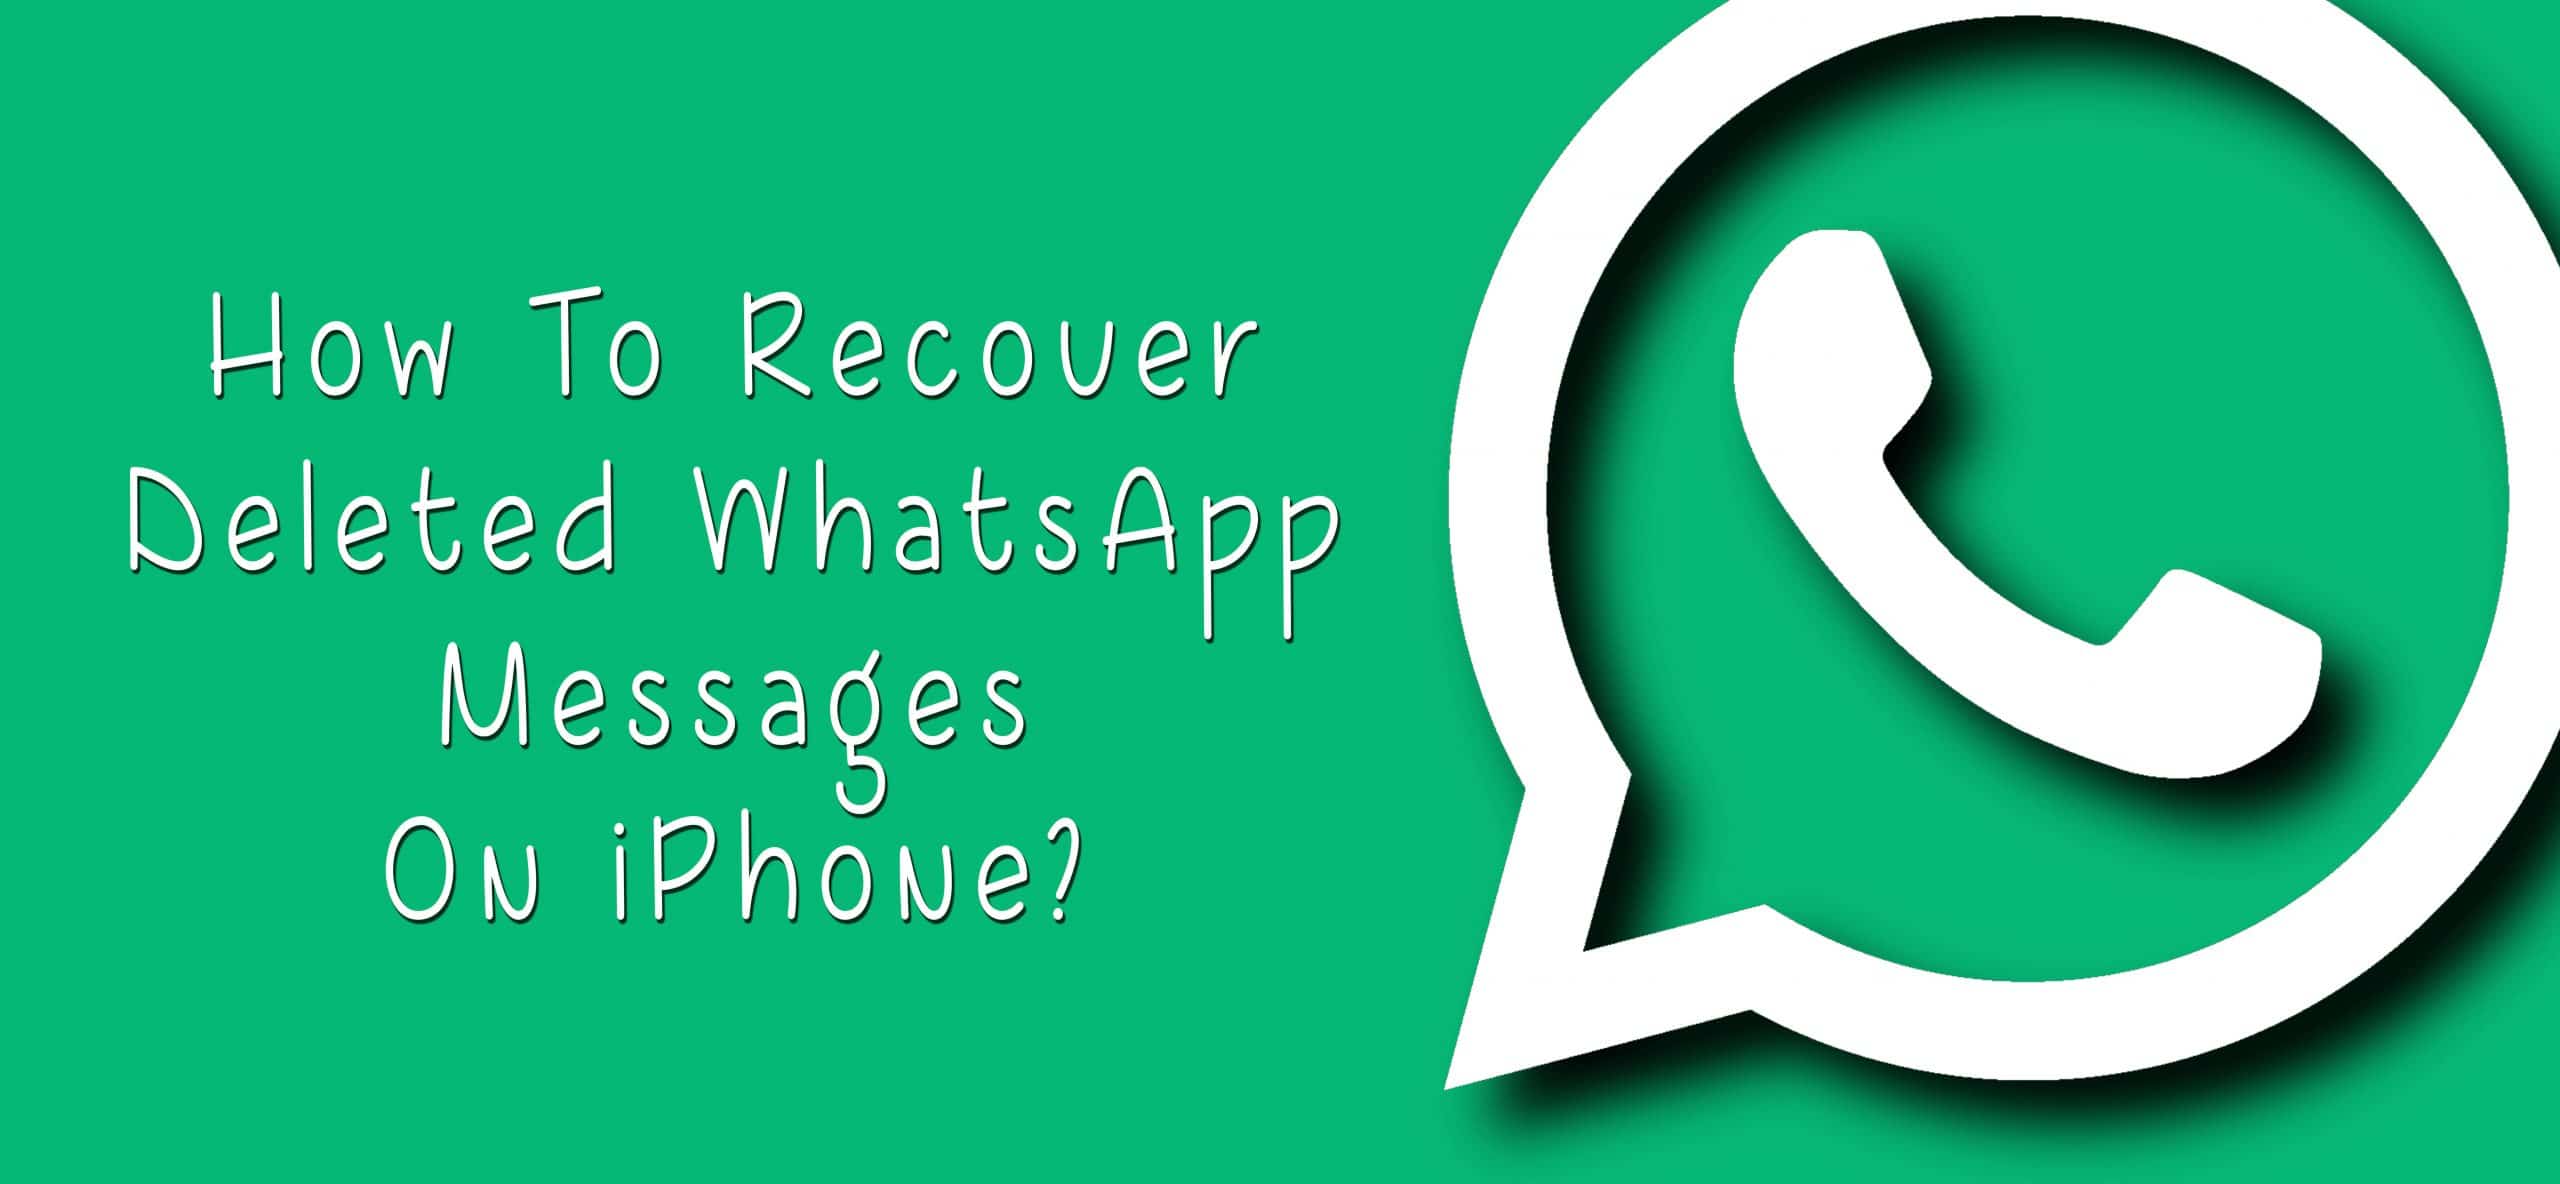 restore-deleted-whatsapp-messages-on-iphone